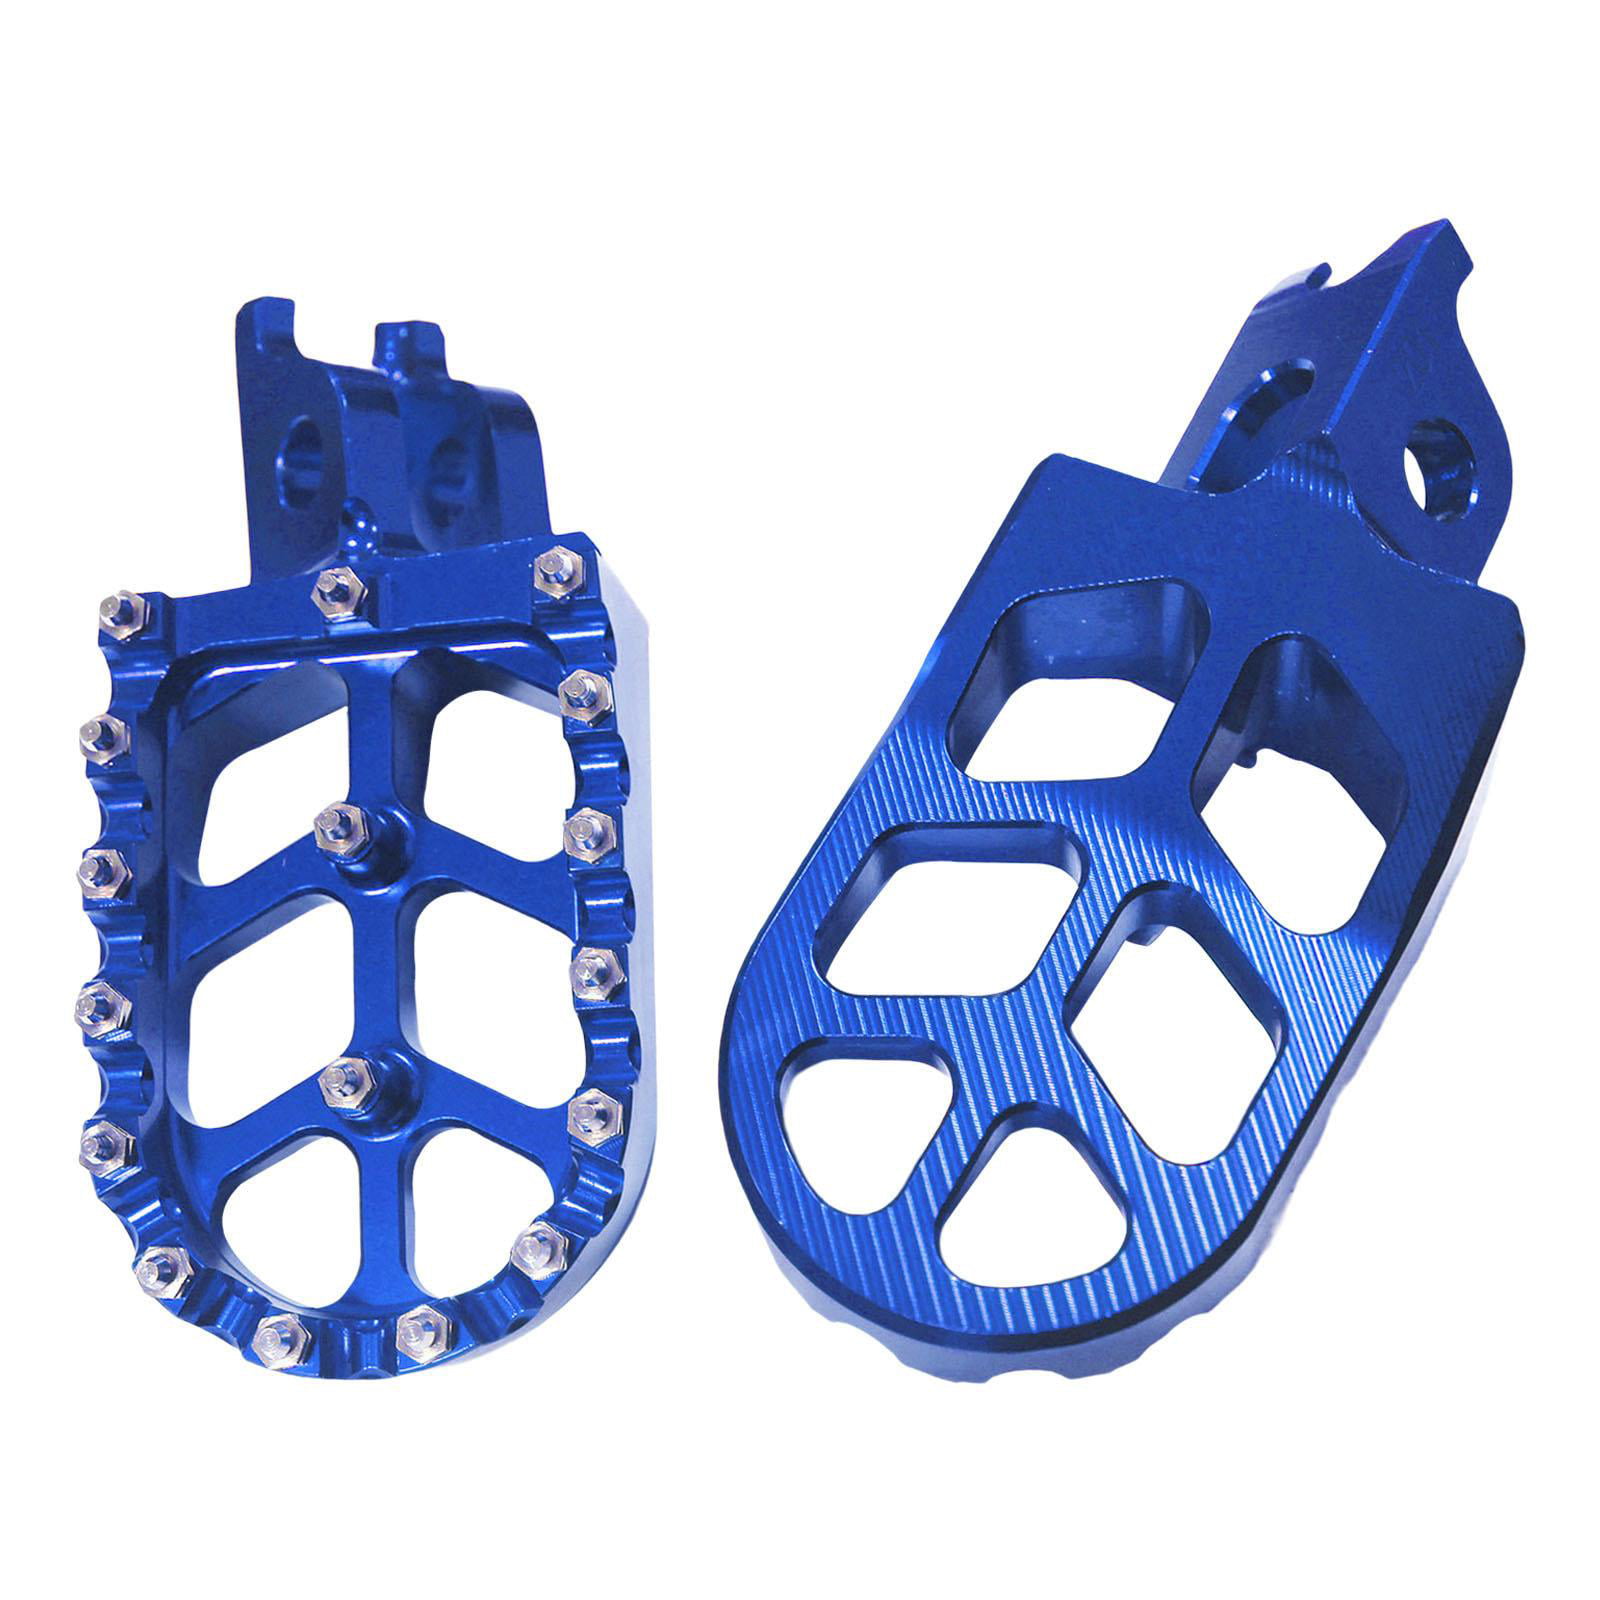 Foot Pegs Footpegs Footrest Pedals CNC Aluminum Foot Rests For For Honda CRF50 XR50 Pit Dirt Motor Trail Bike 